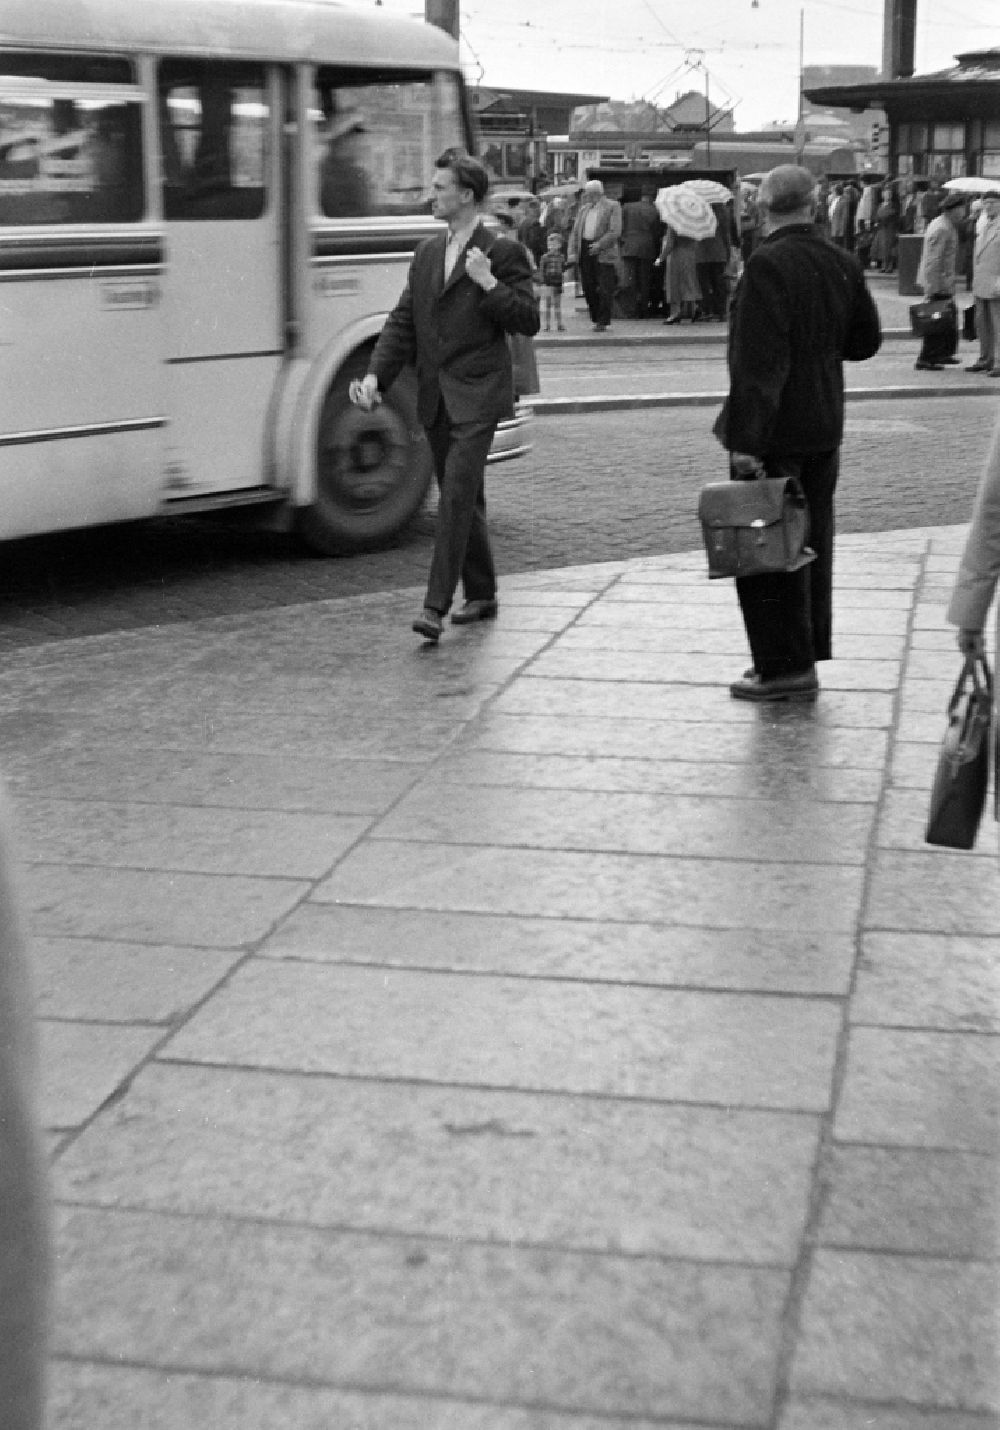 GDR picture archive: Dresden - Travelers wait to get on and off at a bus stop on Theaterplatz in the Altstadt district of Dresden, Saxony in the territory of the former GDR, German Democratic Republic